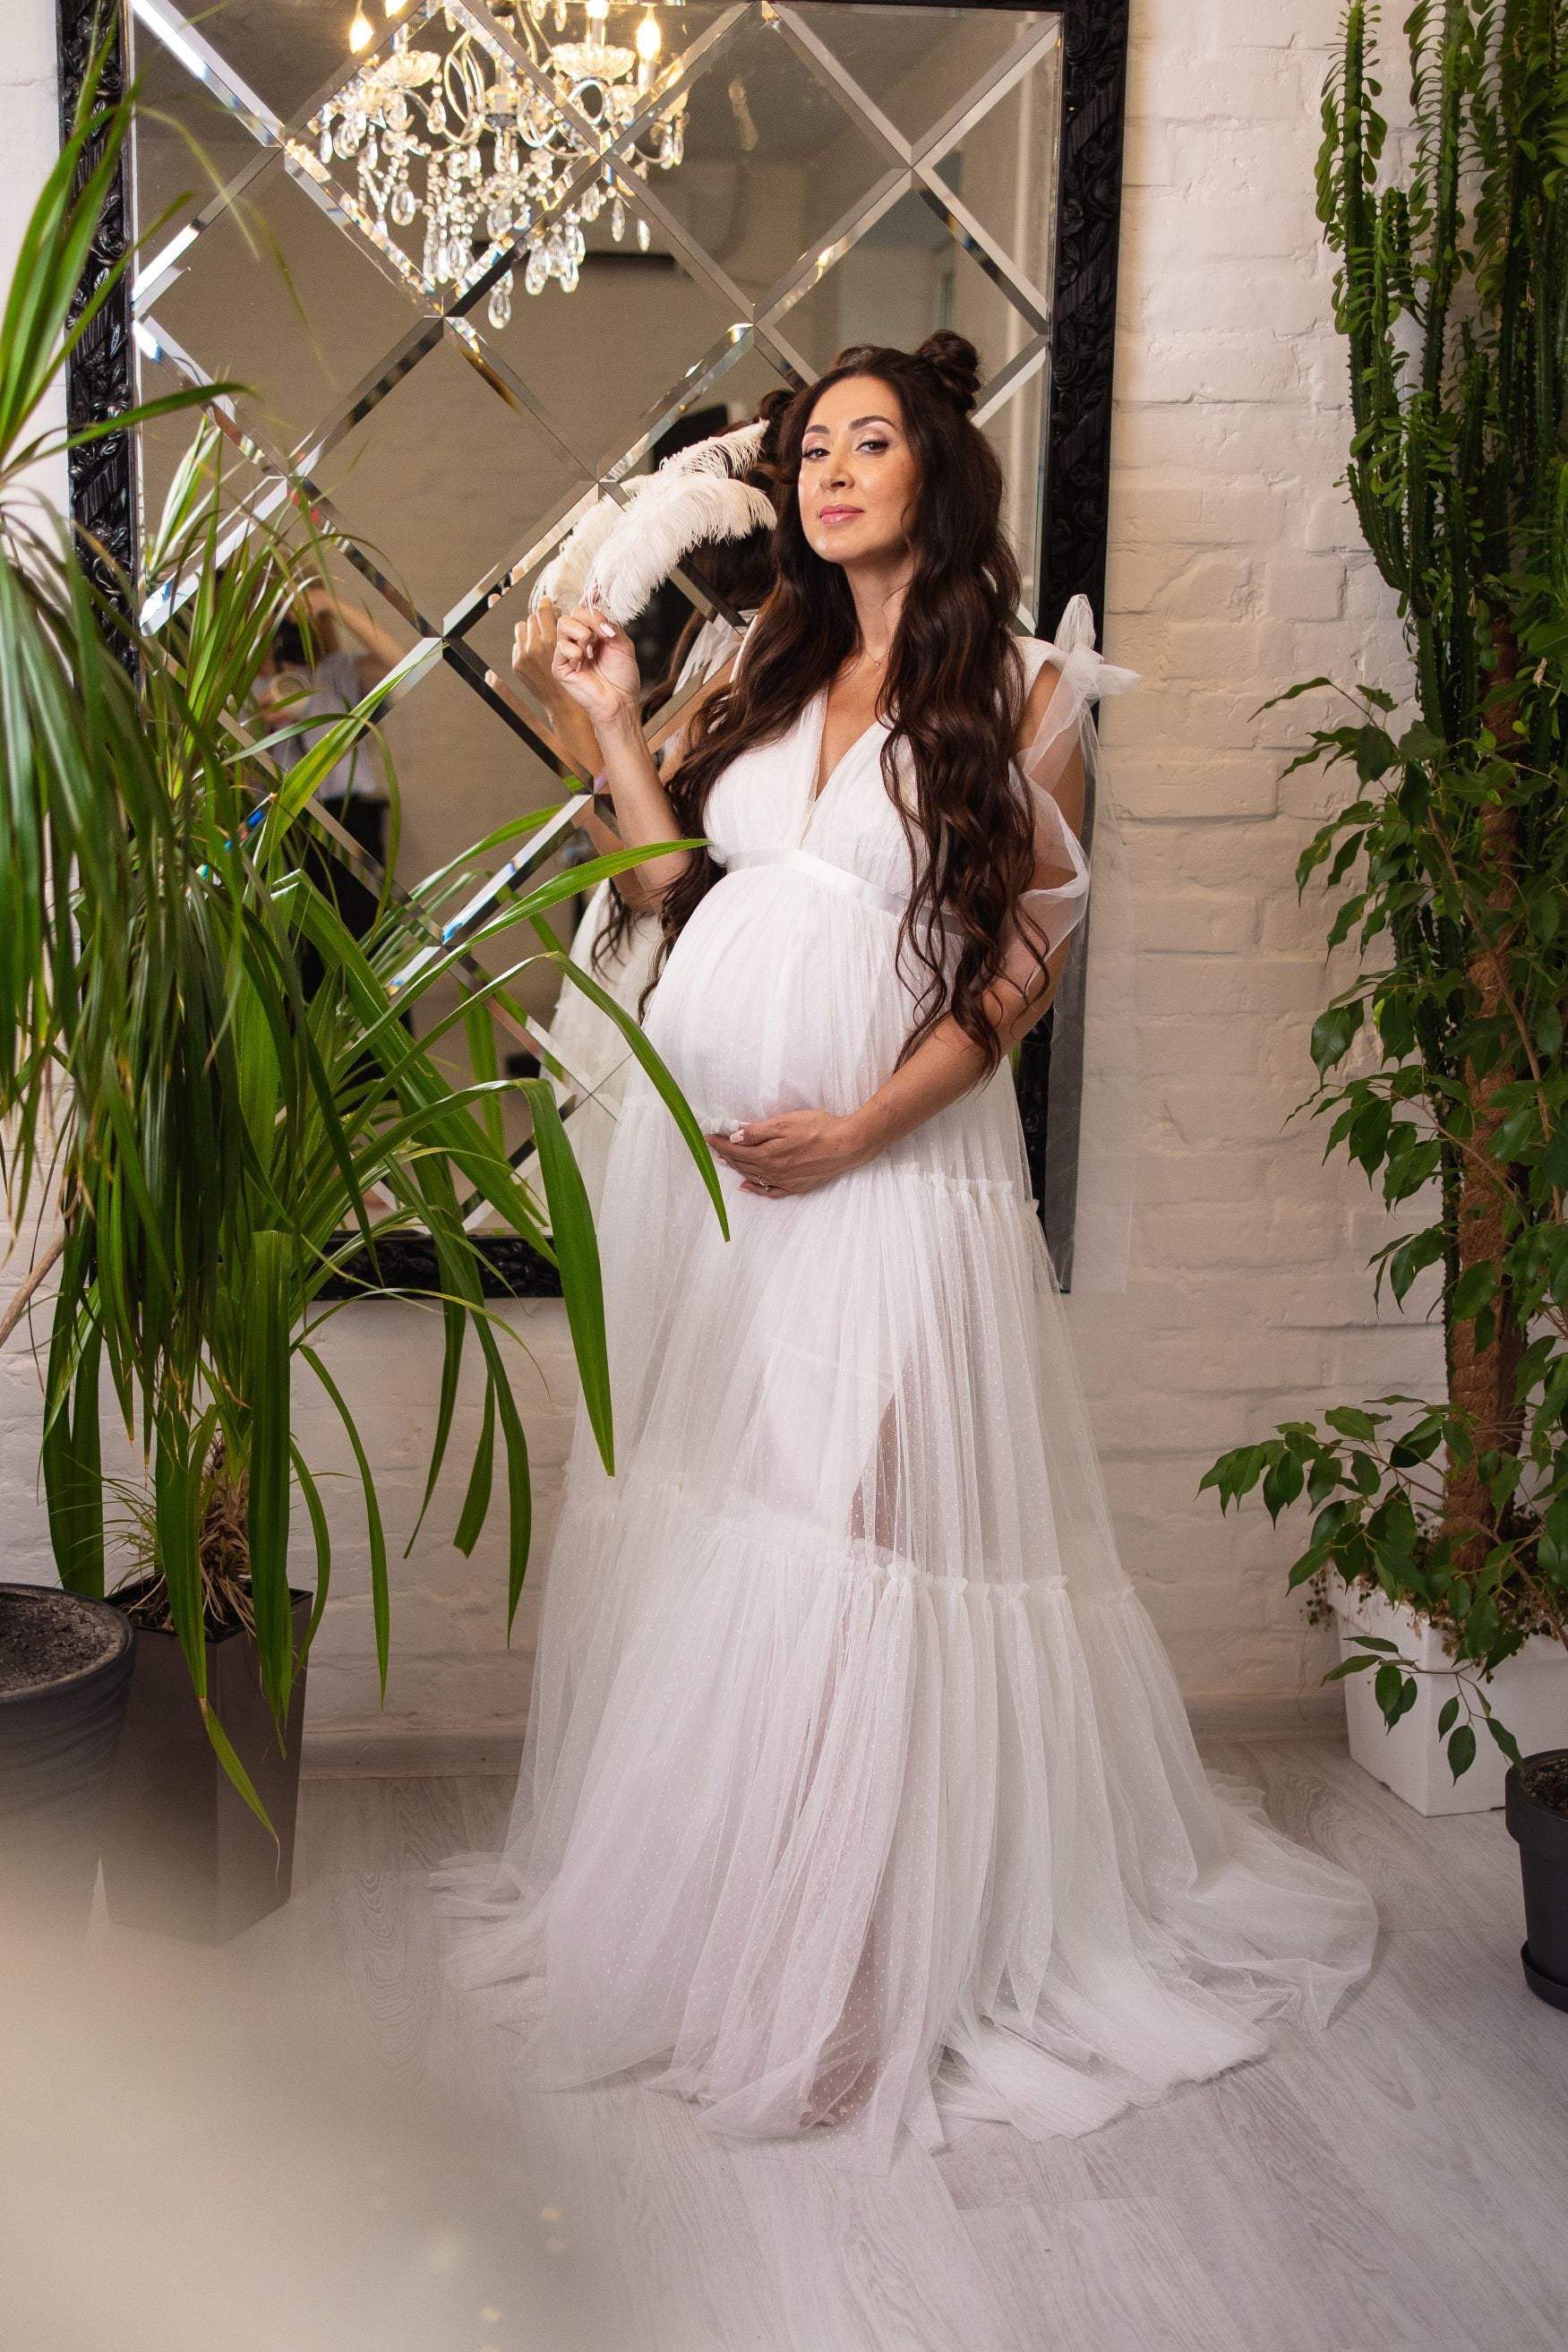 Frostluinai maternity dress for photoshoot summer savings clearances Maternity  Dress Off Shoulder Ruffle Midiphotography Dresses for Baby Shower Photoshoot  Solid Color Pregnant Dresses - Walmart.com